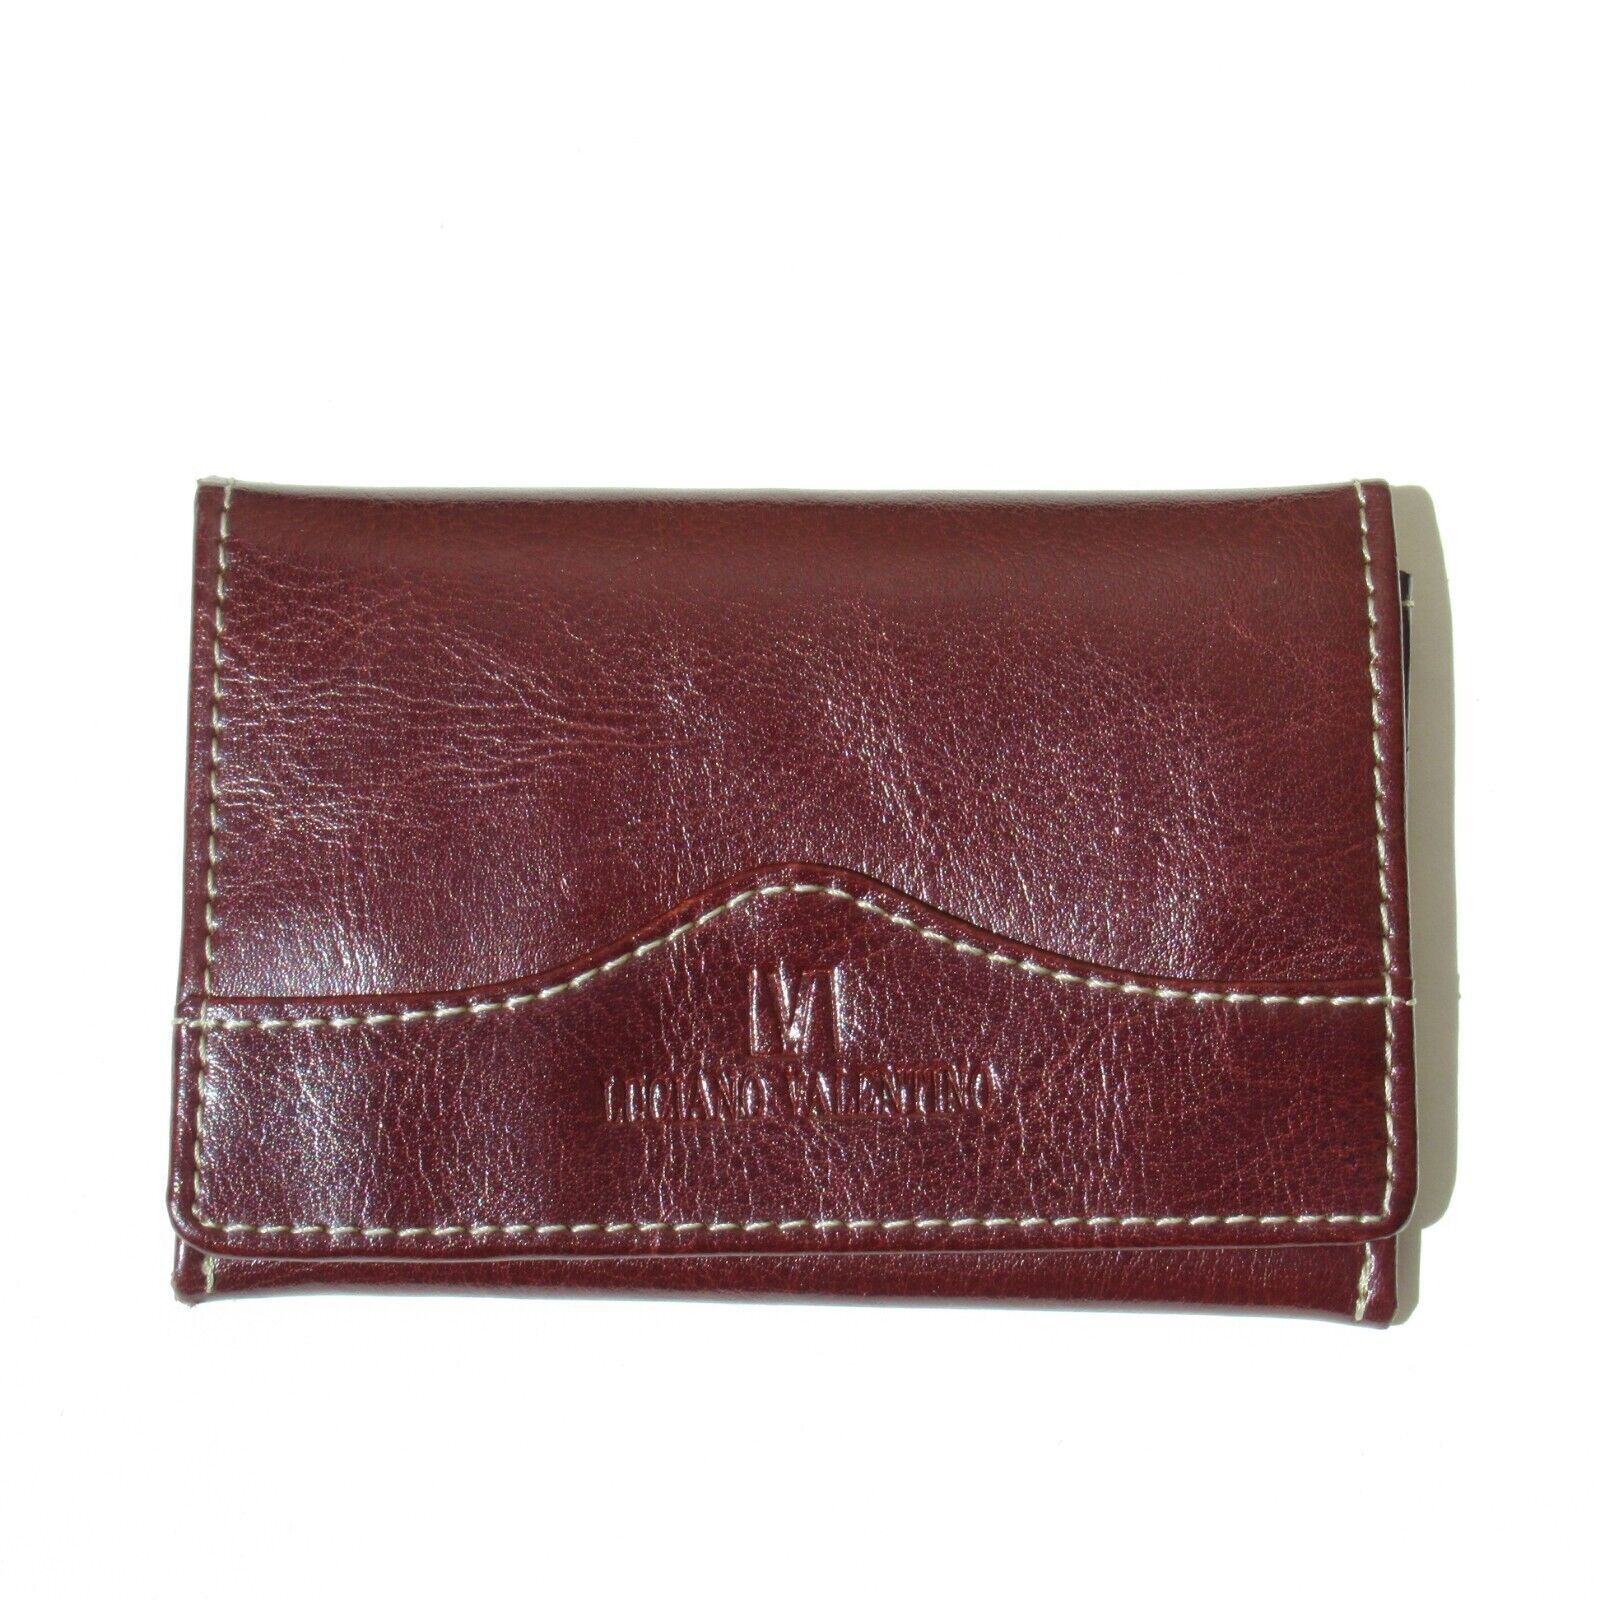 Luciano Valentino LUV Credit Card Wallet Oxblood Leather Bifold Multiple Slots